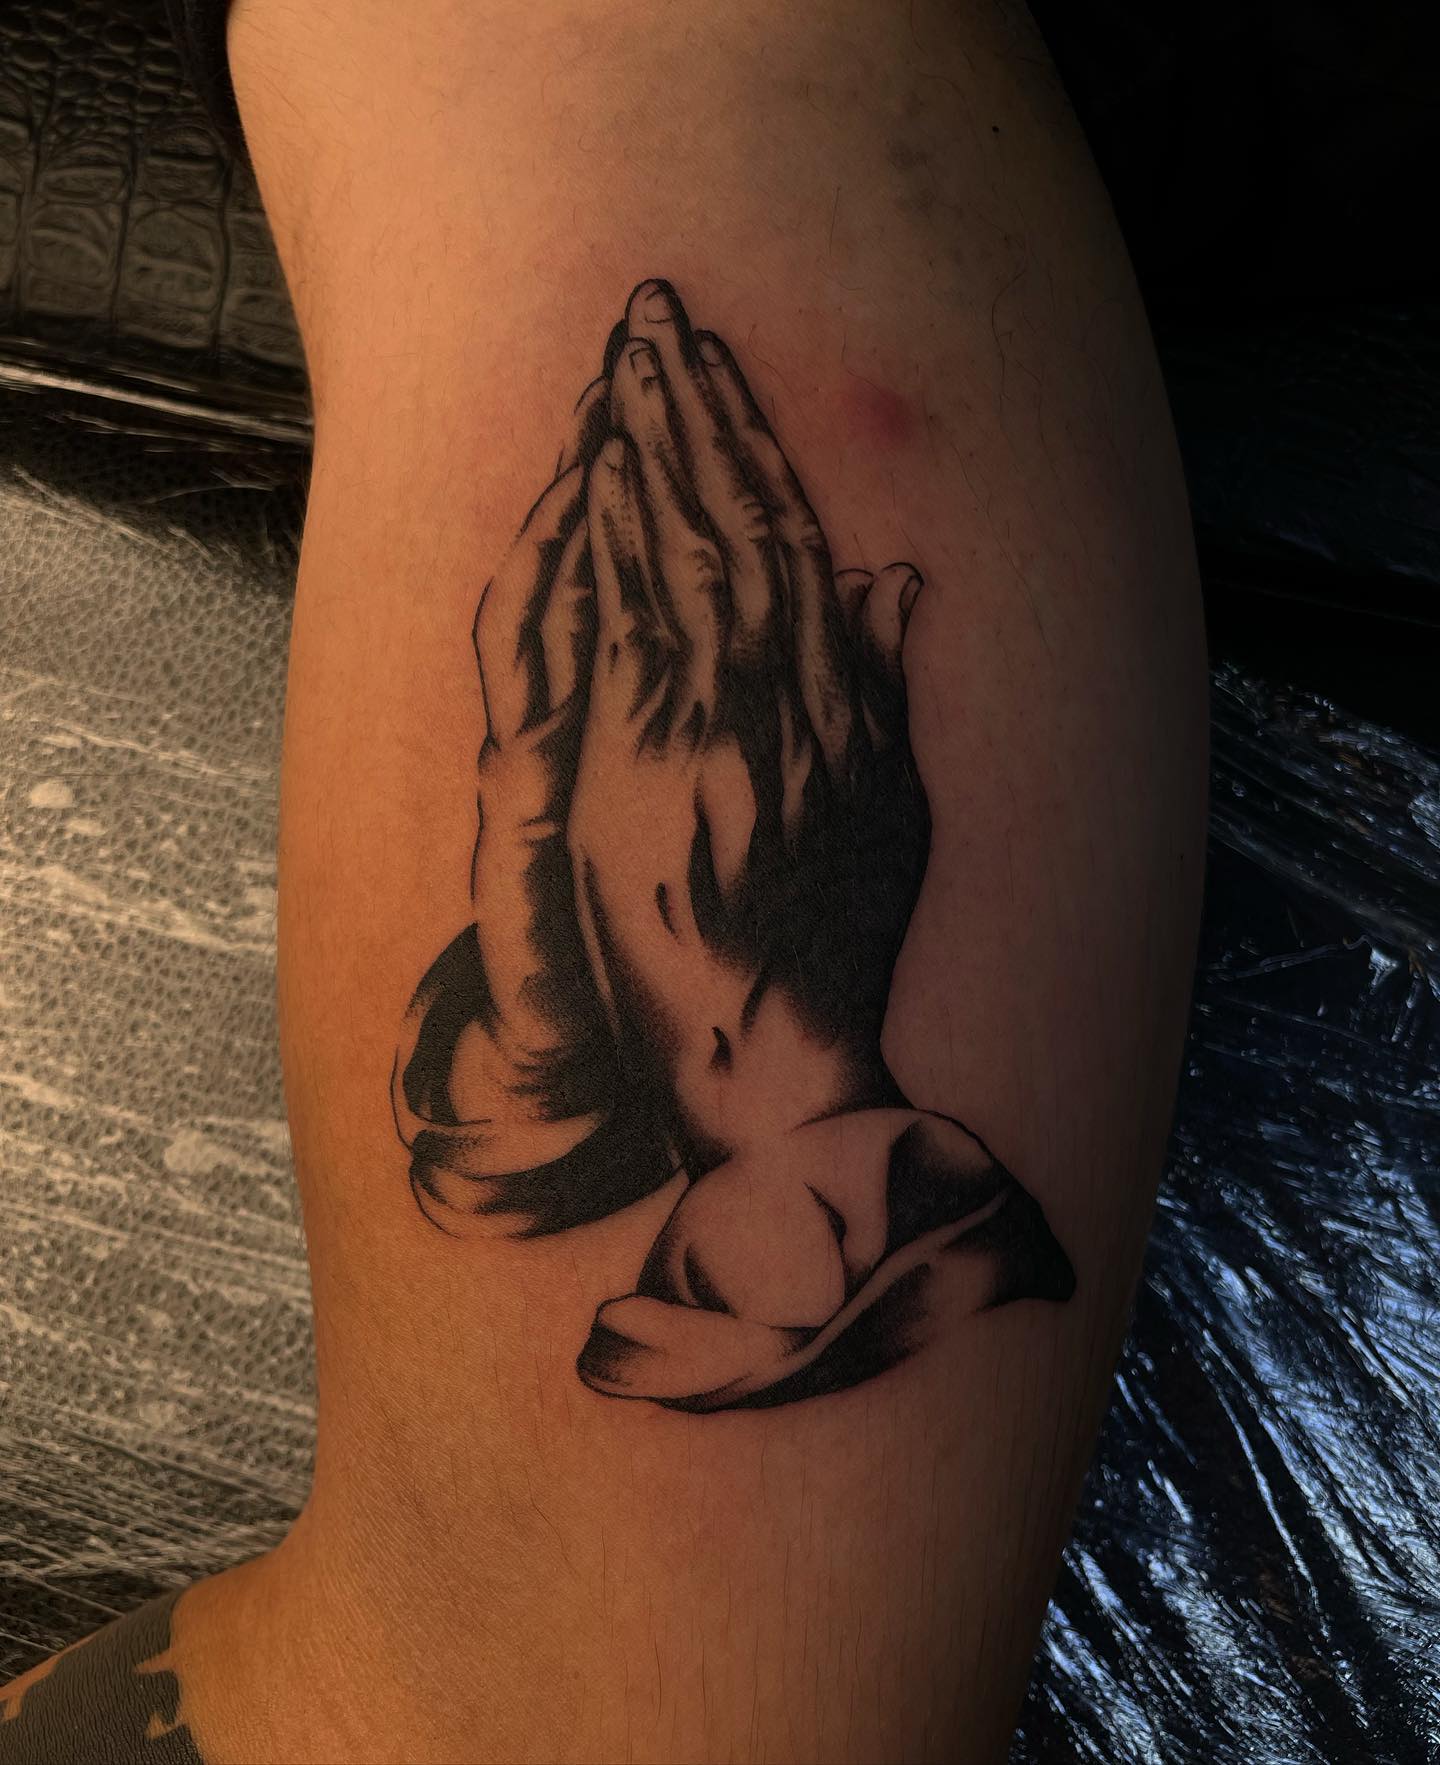 Here is an another realistic praying hands tattoo to adore. You should give it a shot to rock in the crowd.